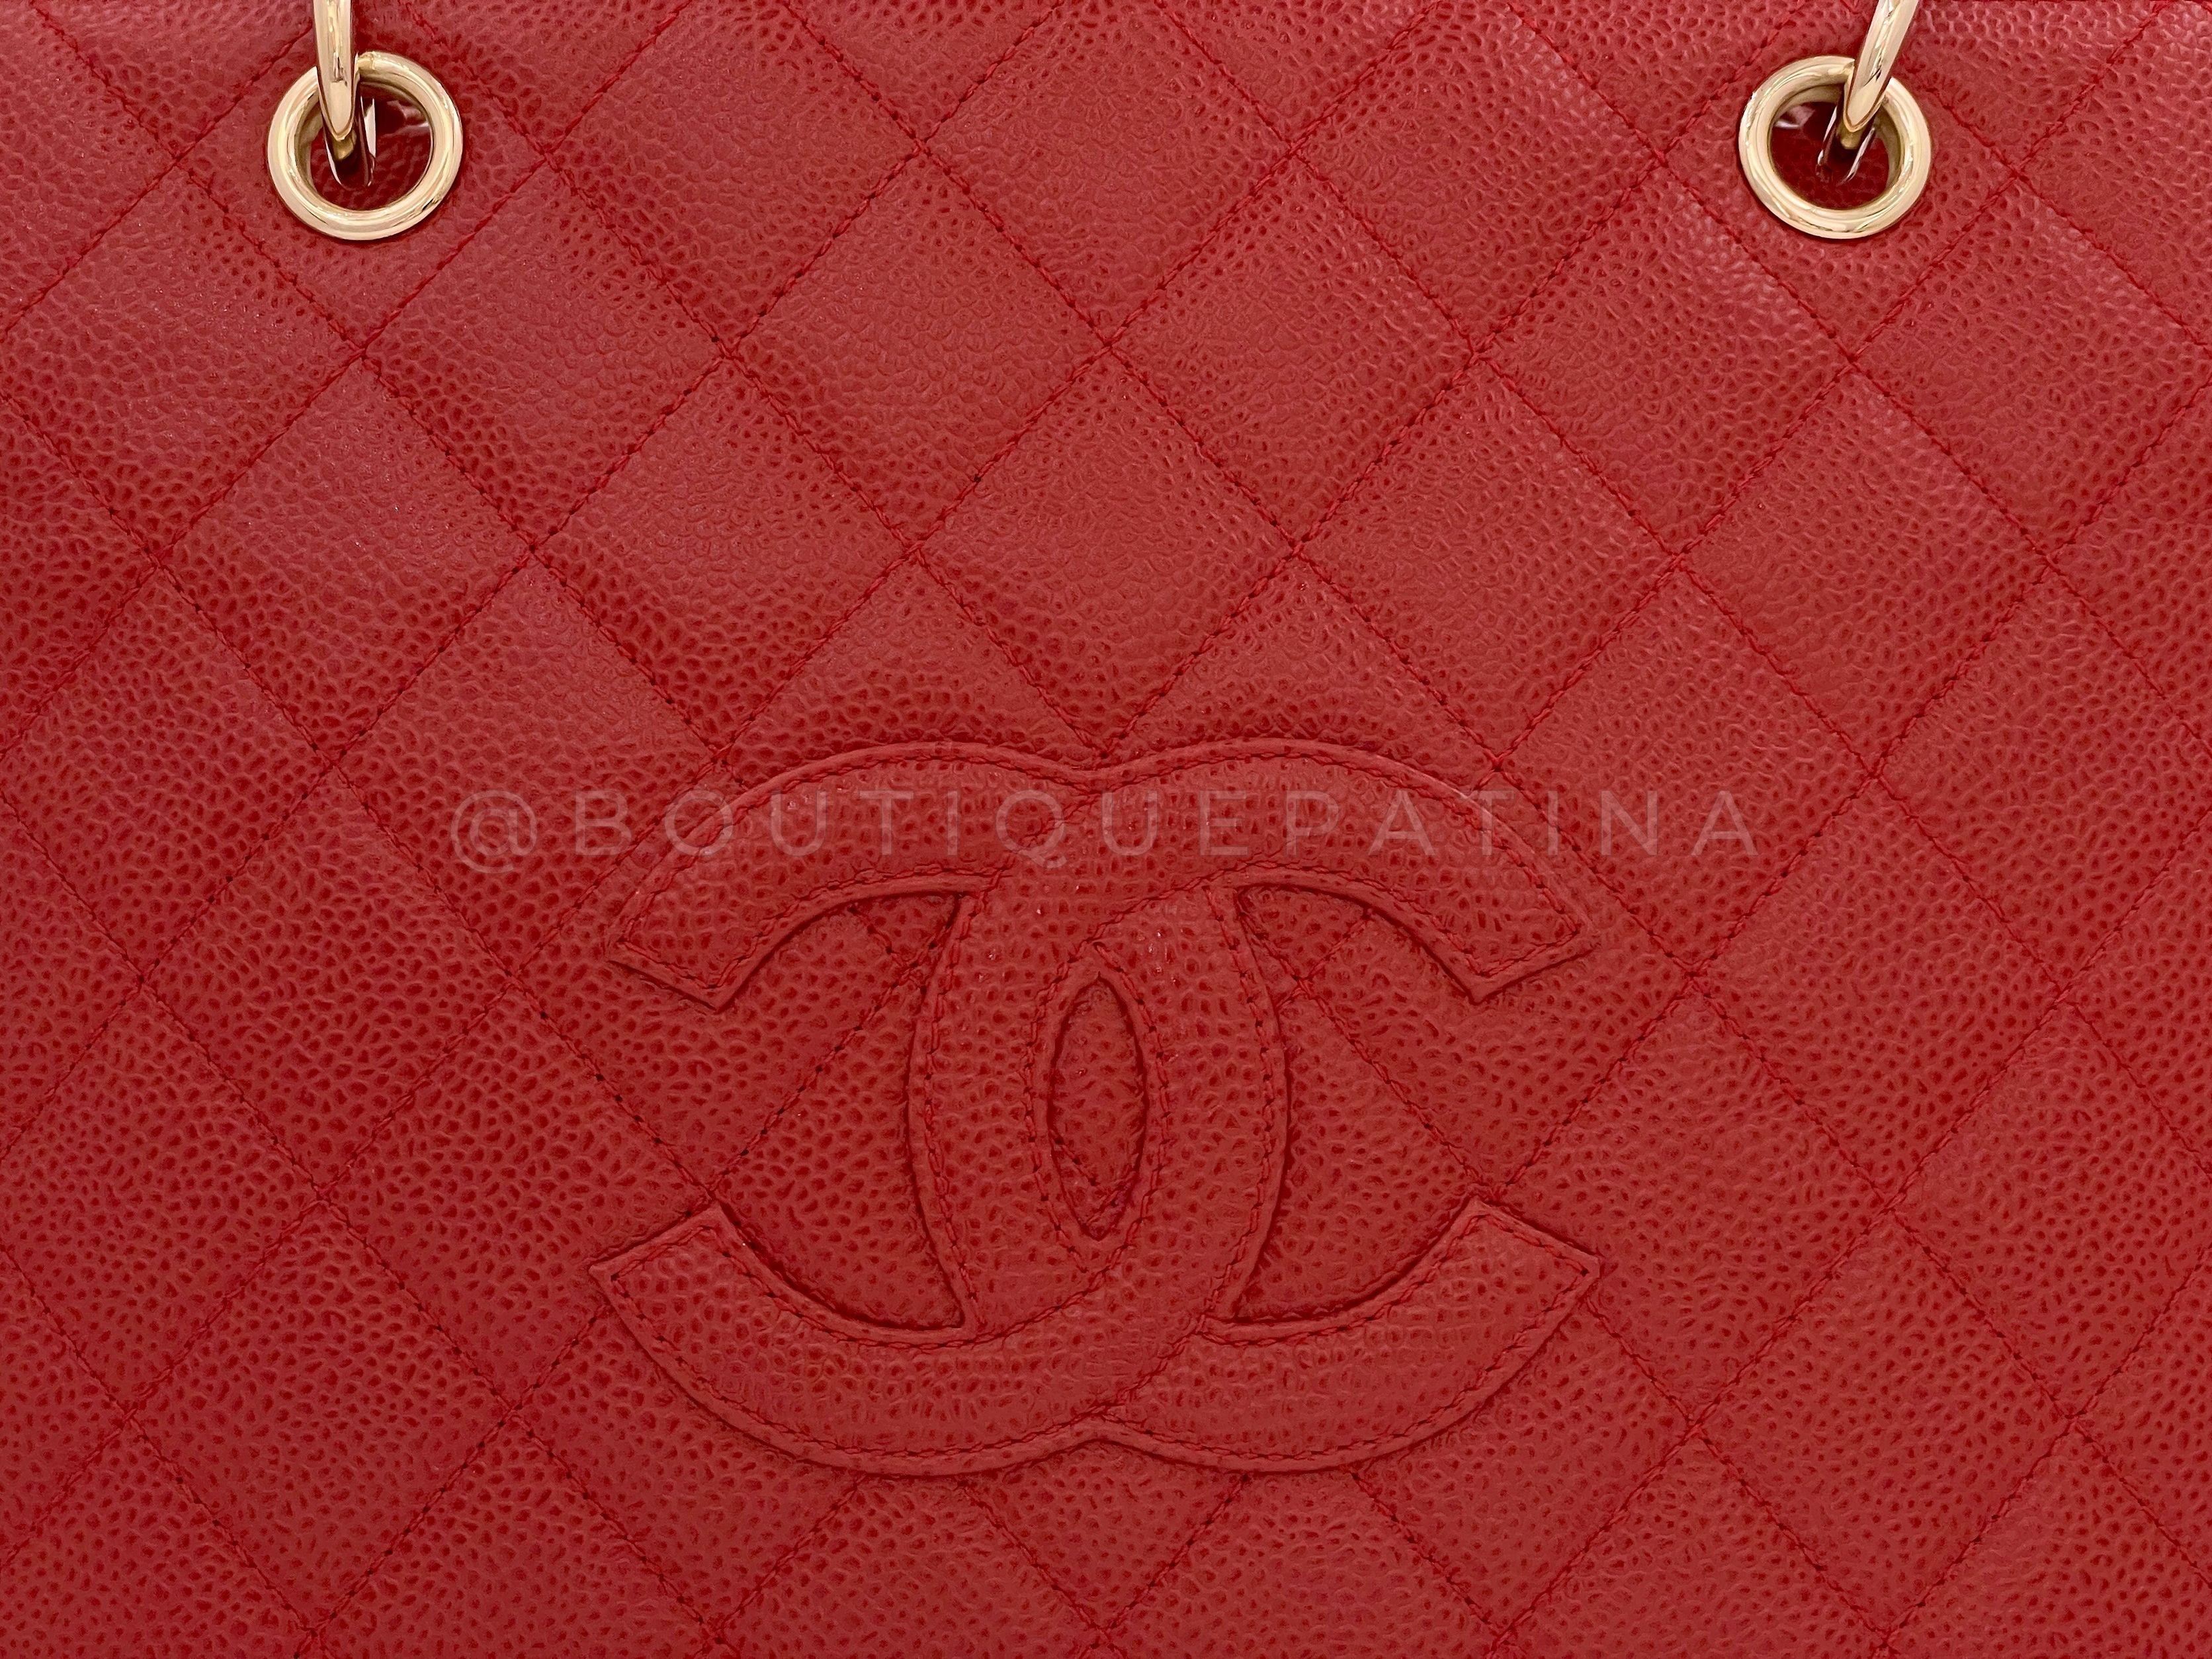 Chanel 2002 Vintage Red Caviar Petite Timeless Tote PTT Bag 24k GHW 65707 1